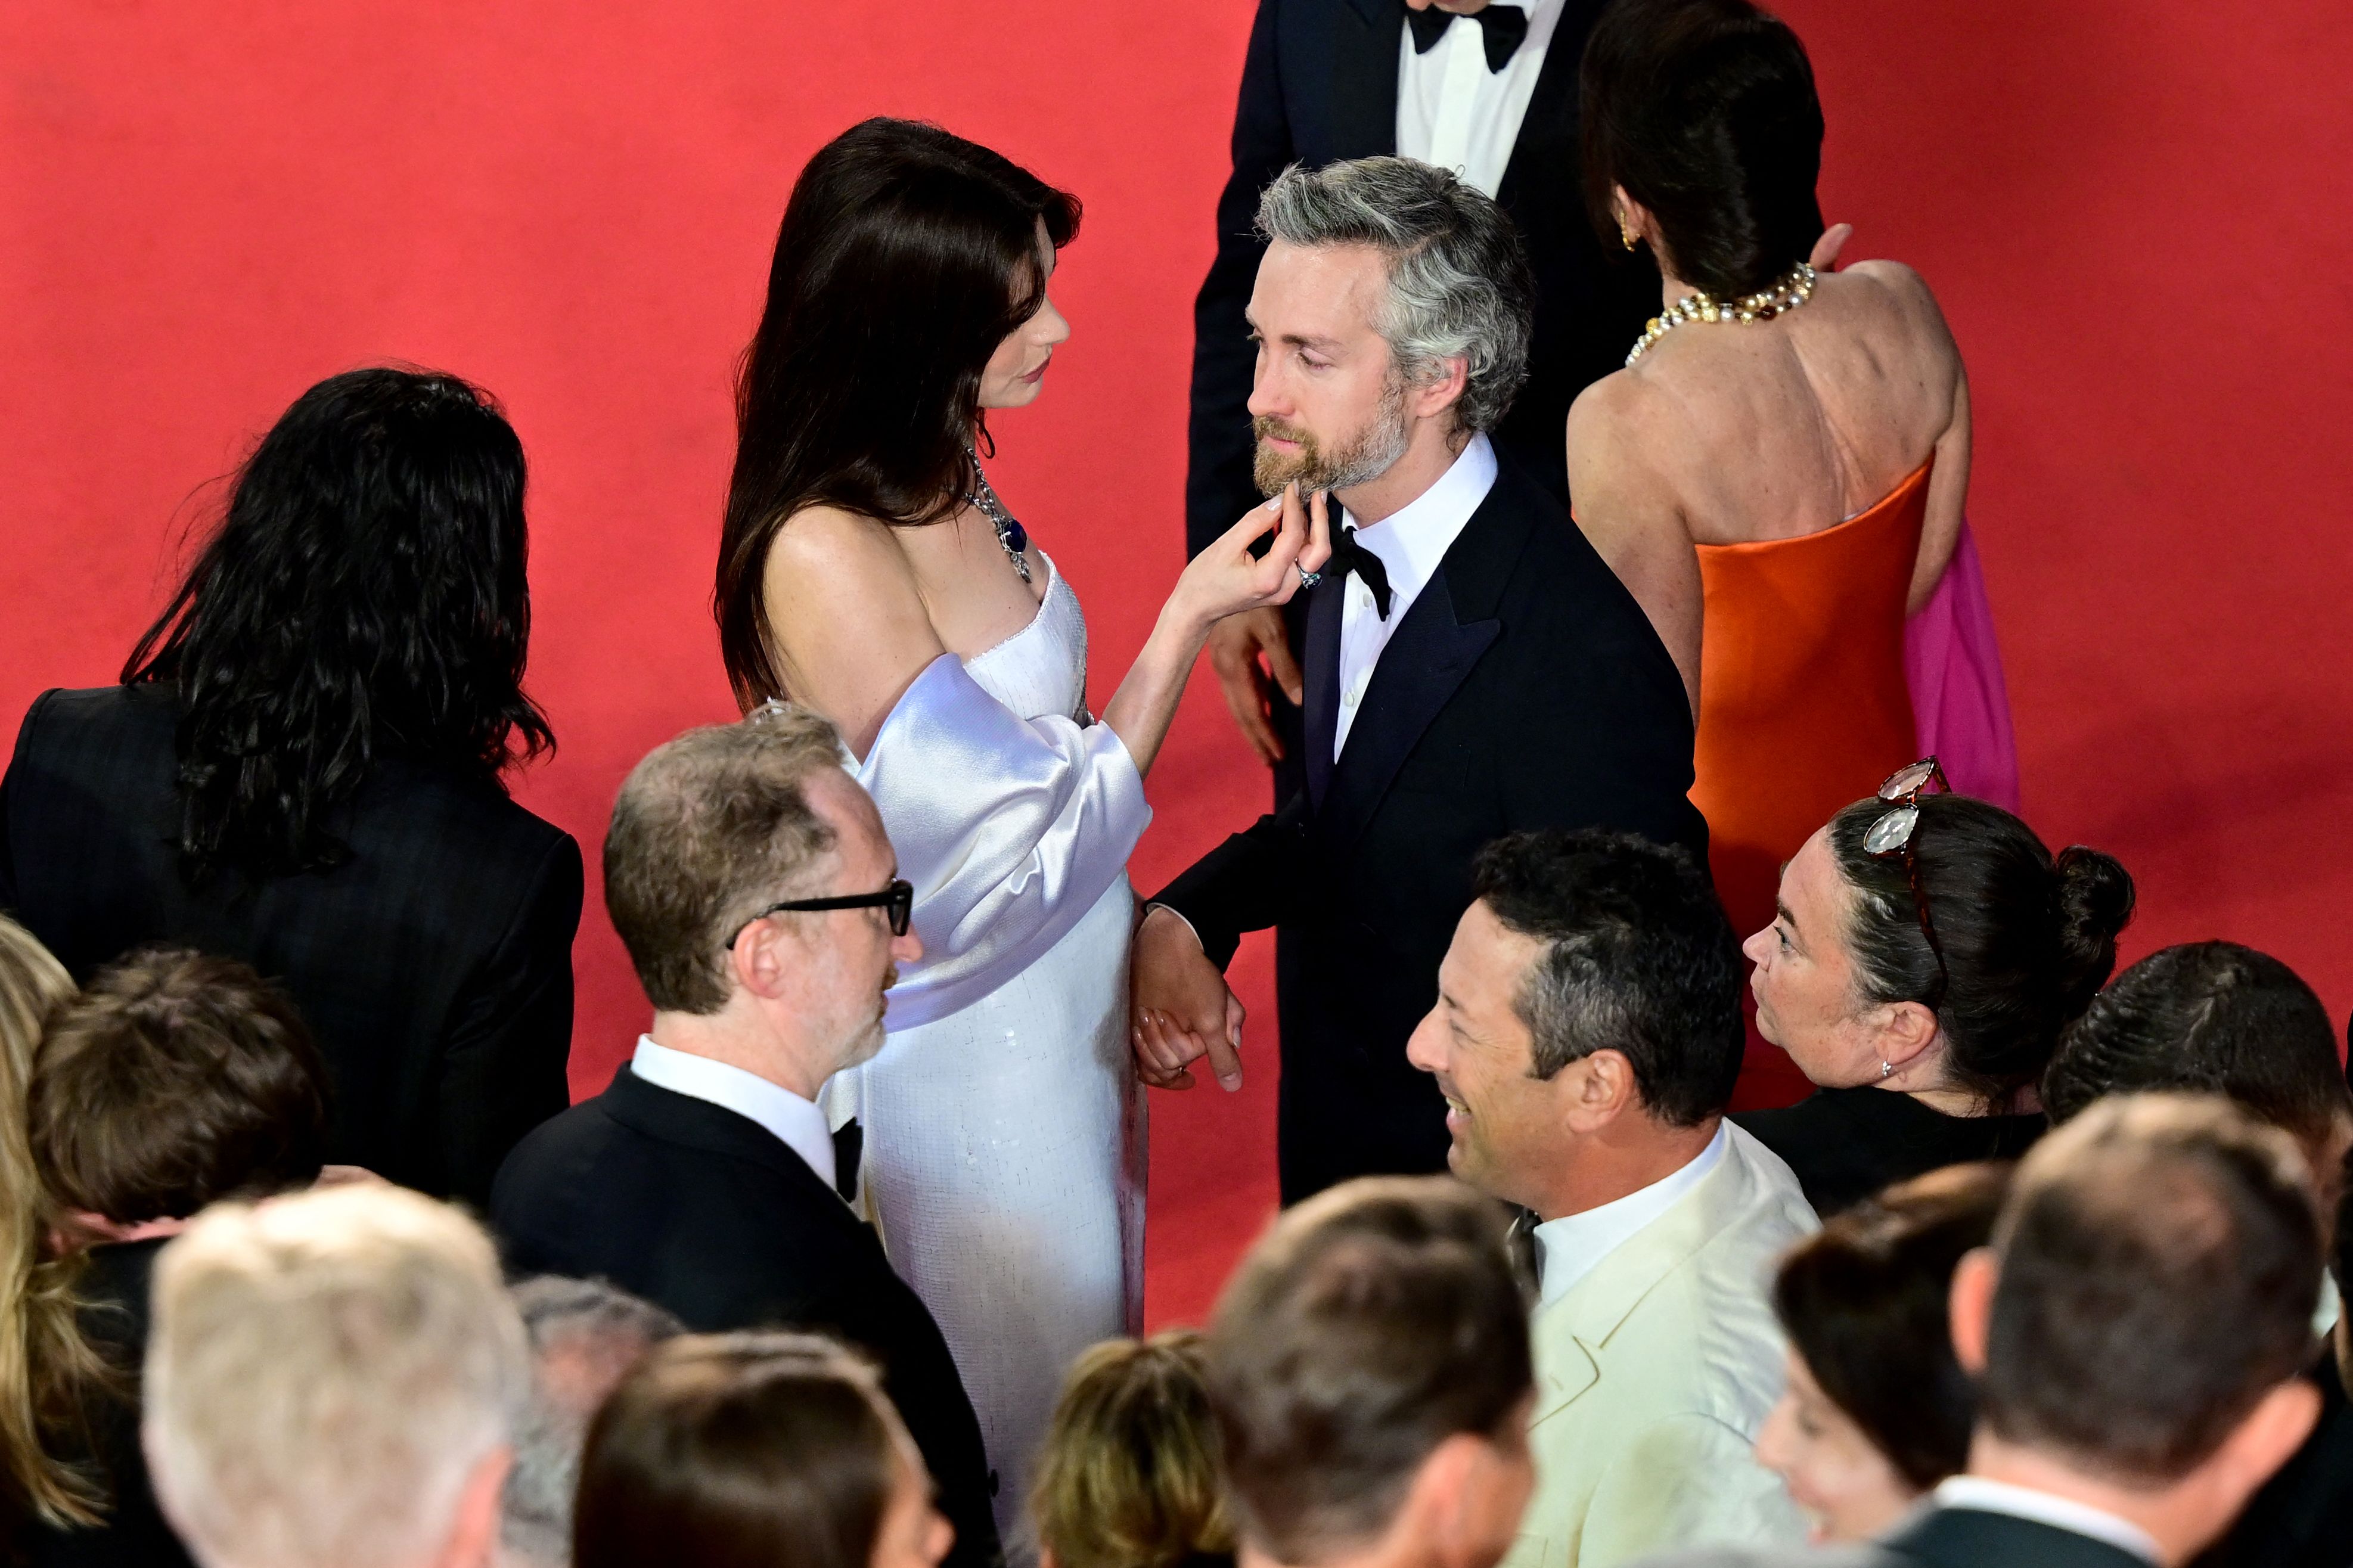 Anne Hathaway and Adam Shulman in Cannes, France on May 19, 2022 | Source: Getty Images